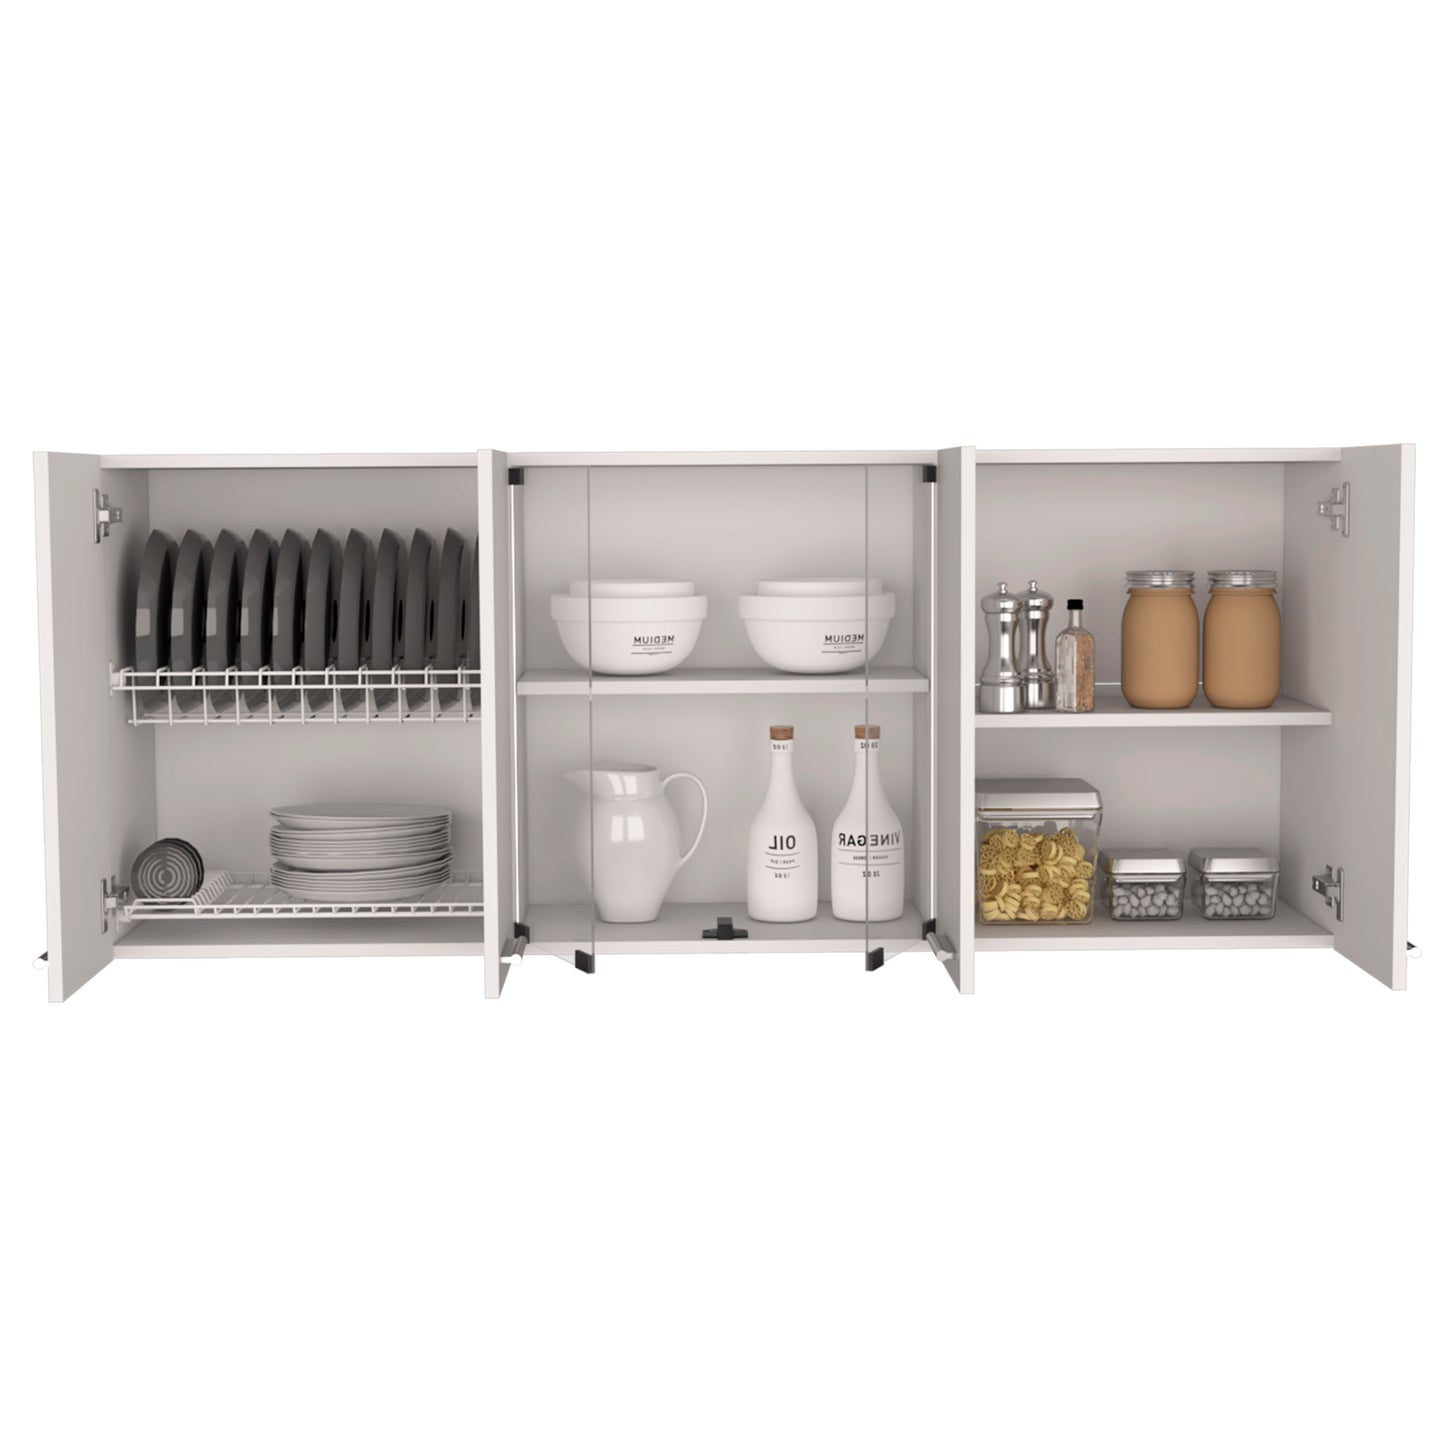 Wall cabinet 24" H, four Doors, with two internal Shelves and internal plate and glass organizer, two Storage Shelves with two glass Doors, White